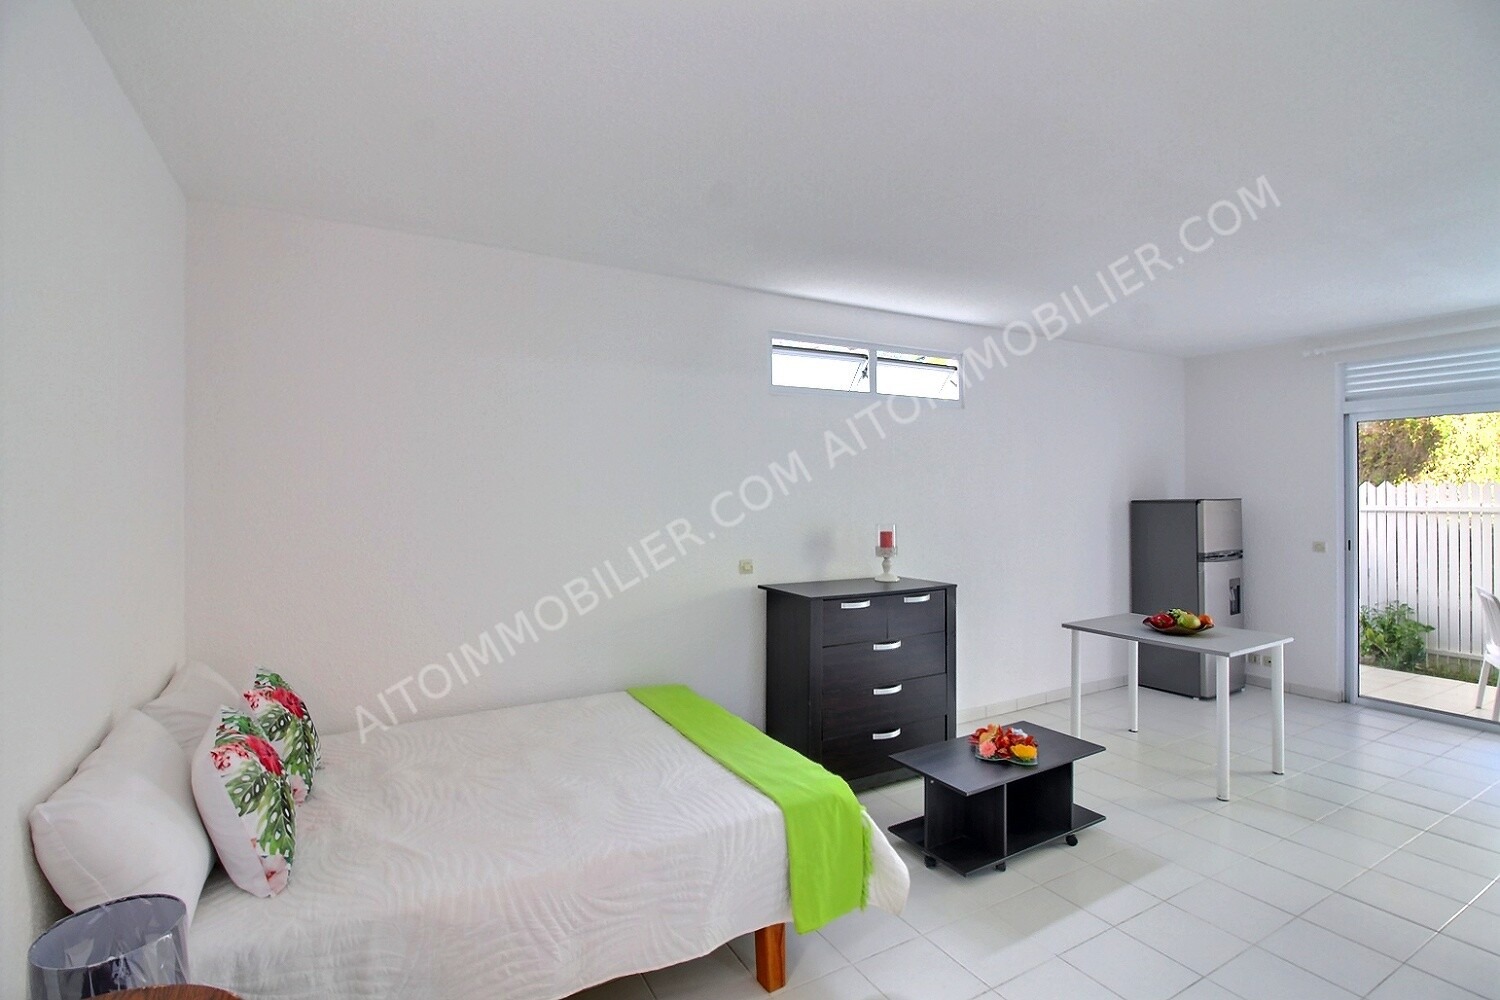 LOCATION APPARTEMENT  PUNAAUIA F1 2